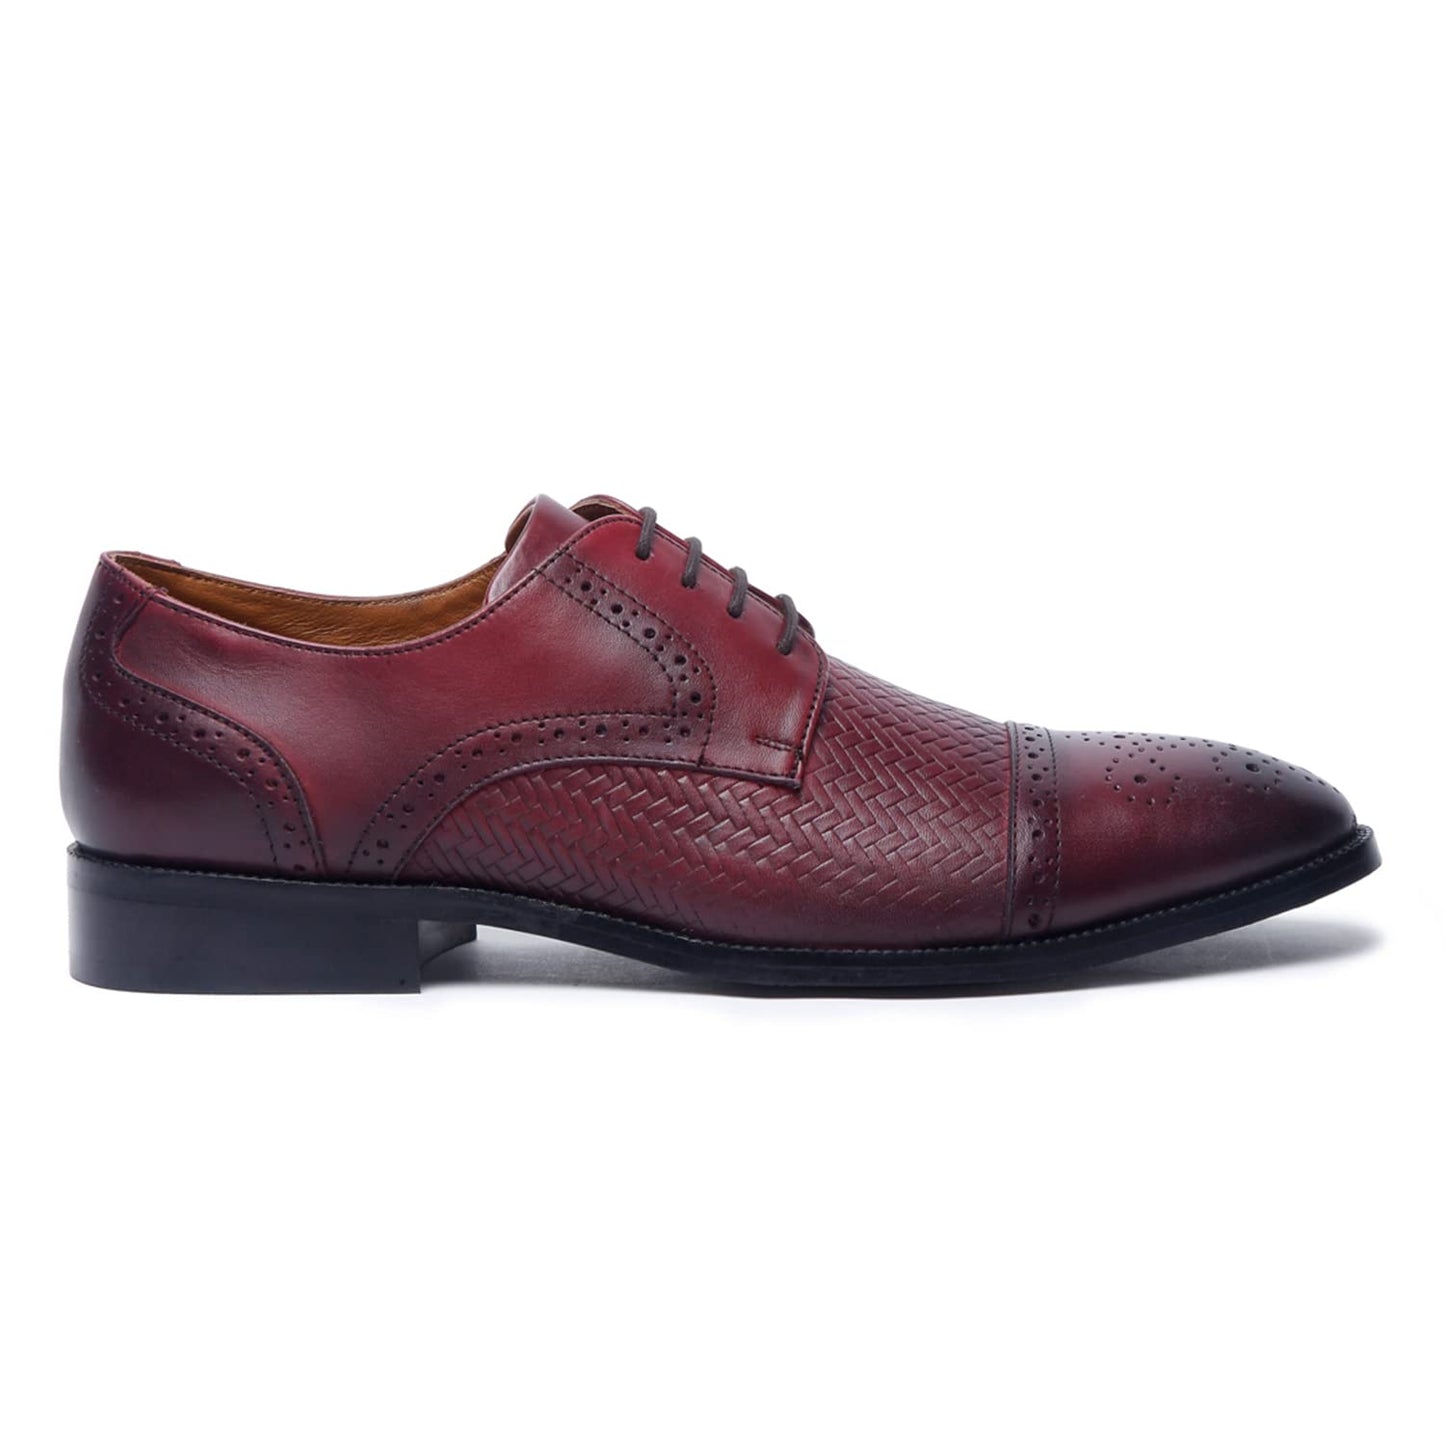 LOUIS STITCH Men's Rosewood Maroon Italian Leather Oxford Formal Shoes Handmade Stylish Slipon Shoes for Men (Britain WEOXRW) (Size- 9 UK)